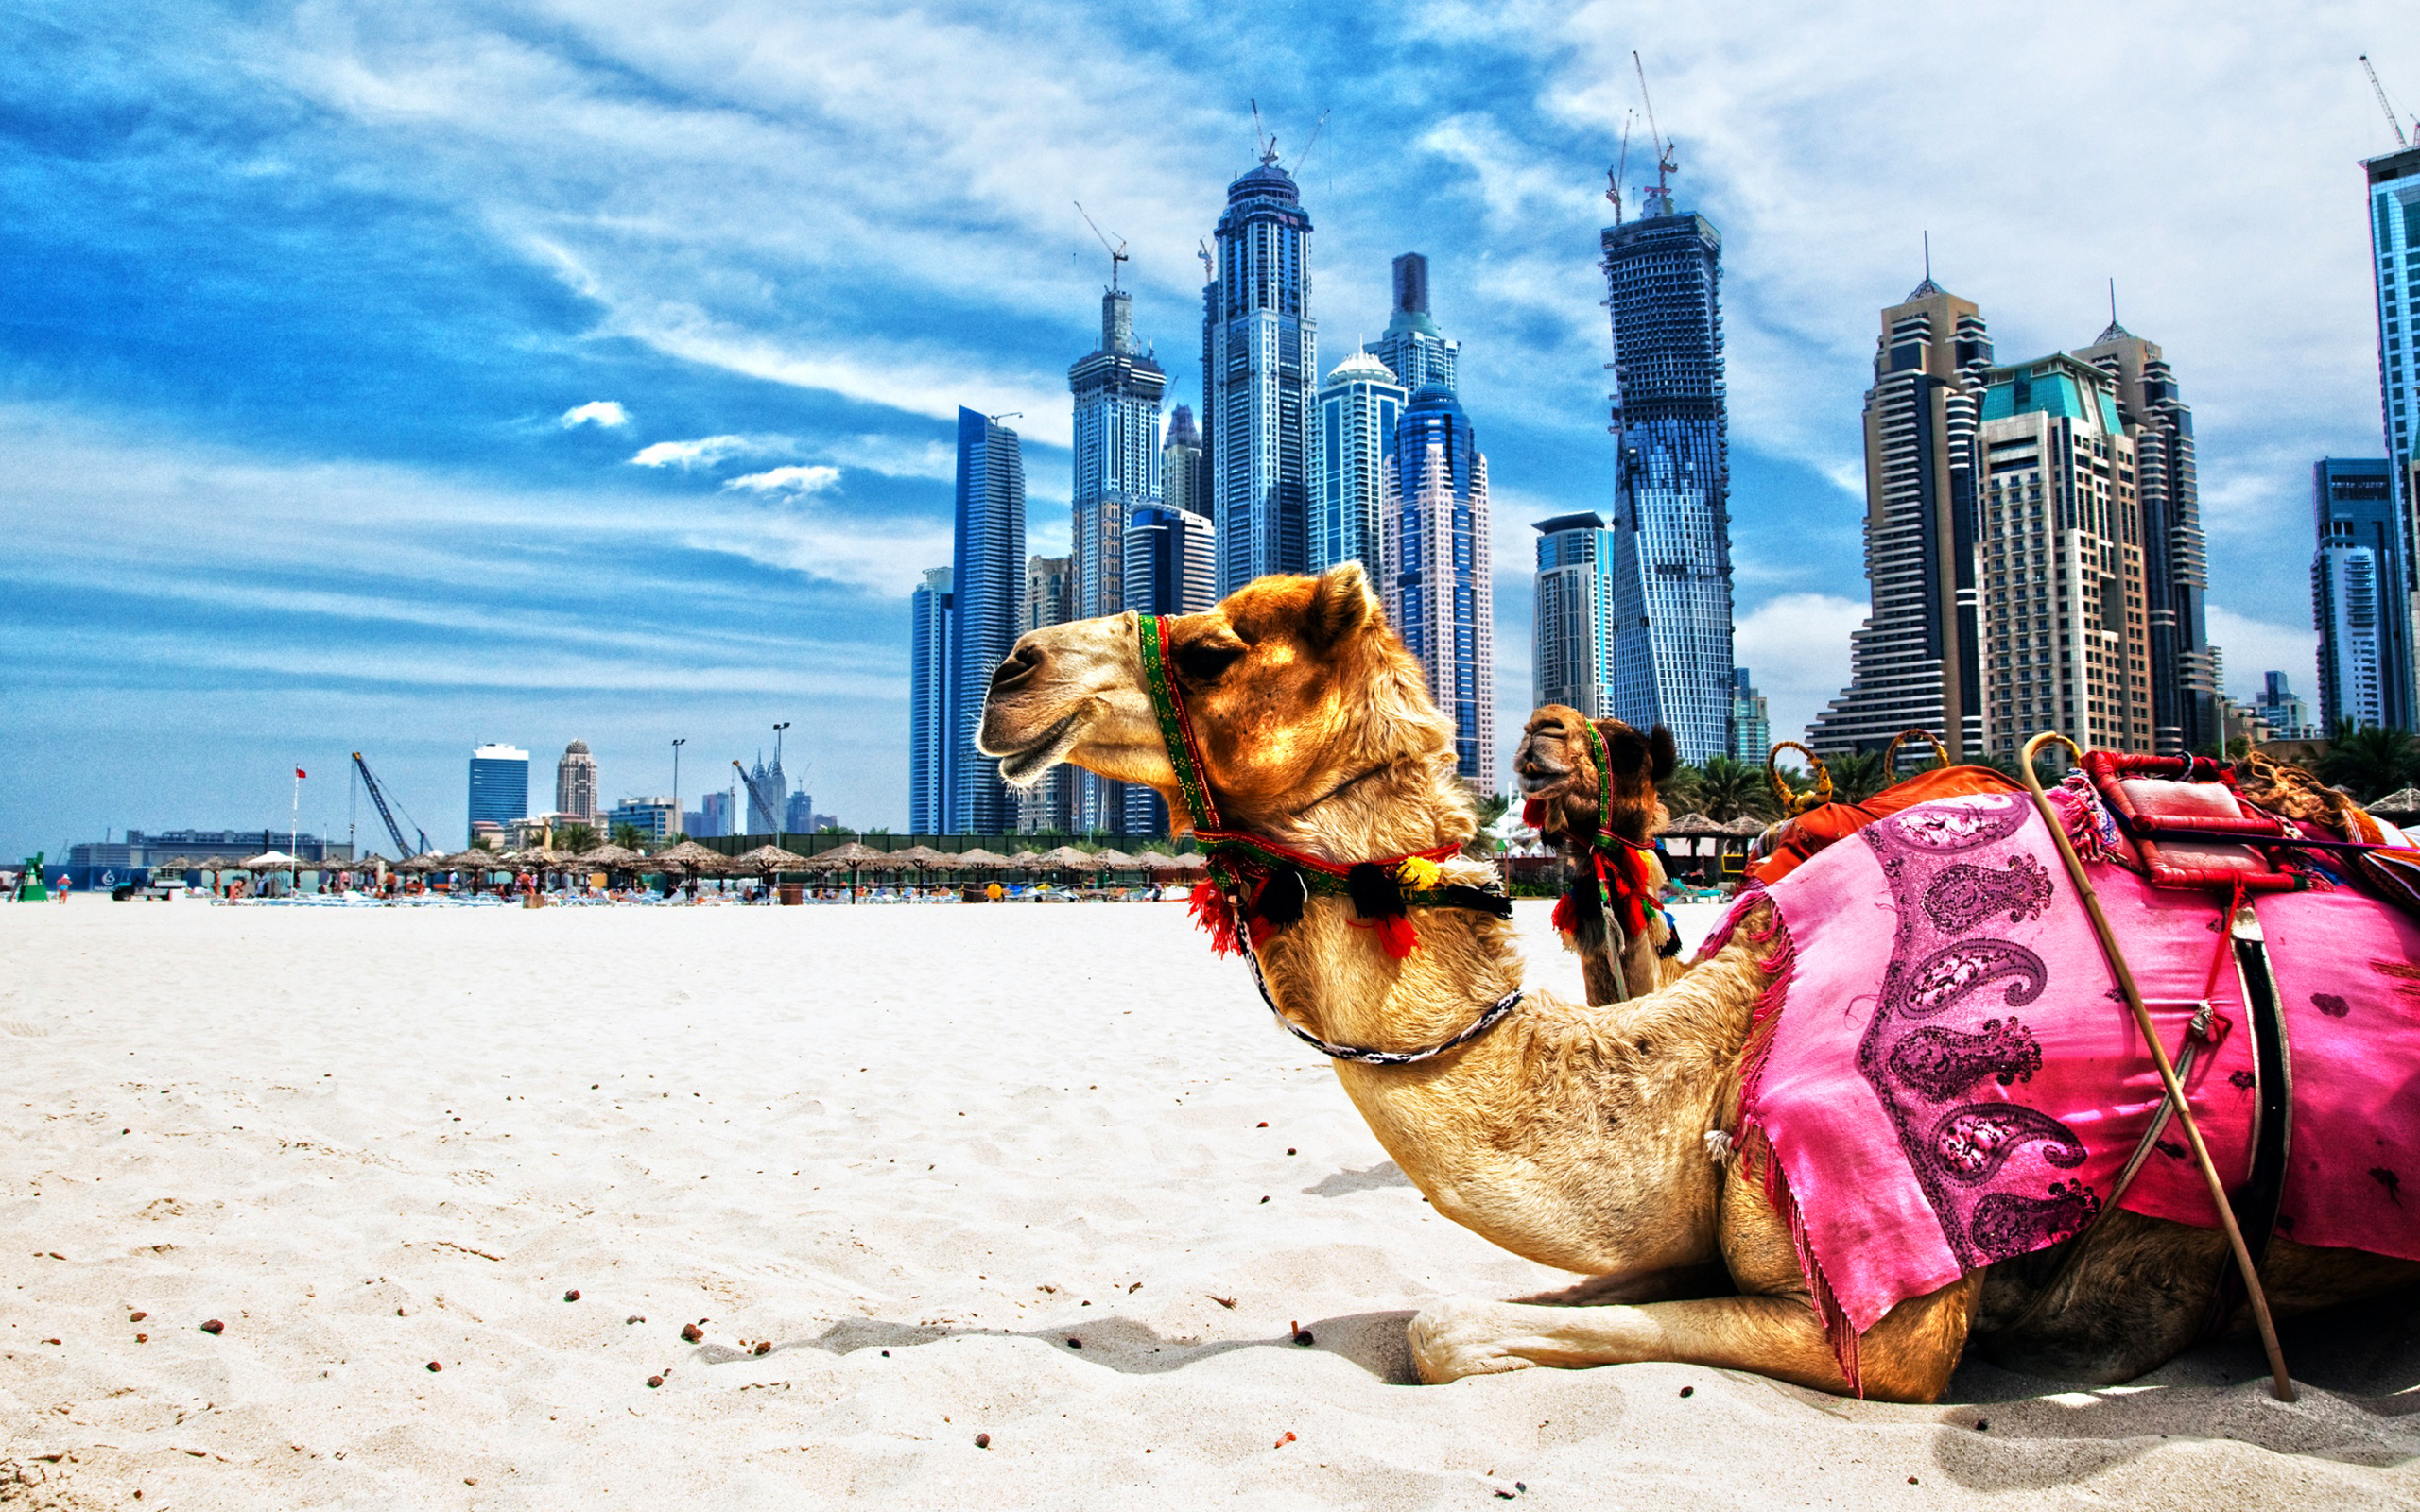 Download wallpaper camels, HDR, Dubai, beach, UAE, skyscrapers, United Arab Emirates for desktop with resolution 2560x1600. High Quality HD picture wallpaper